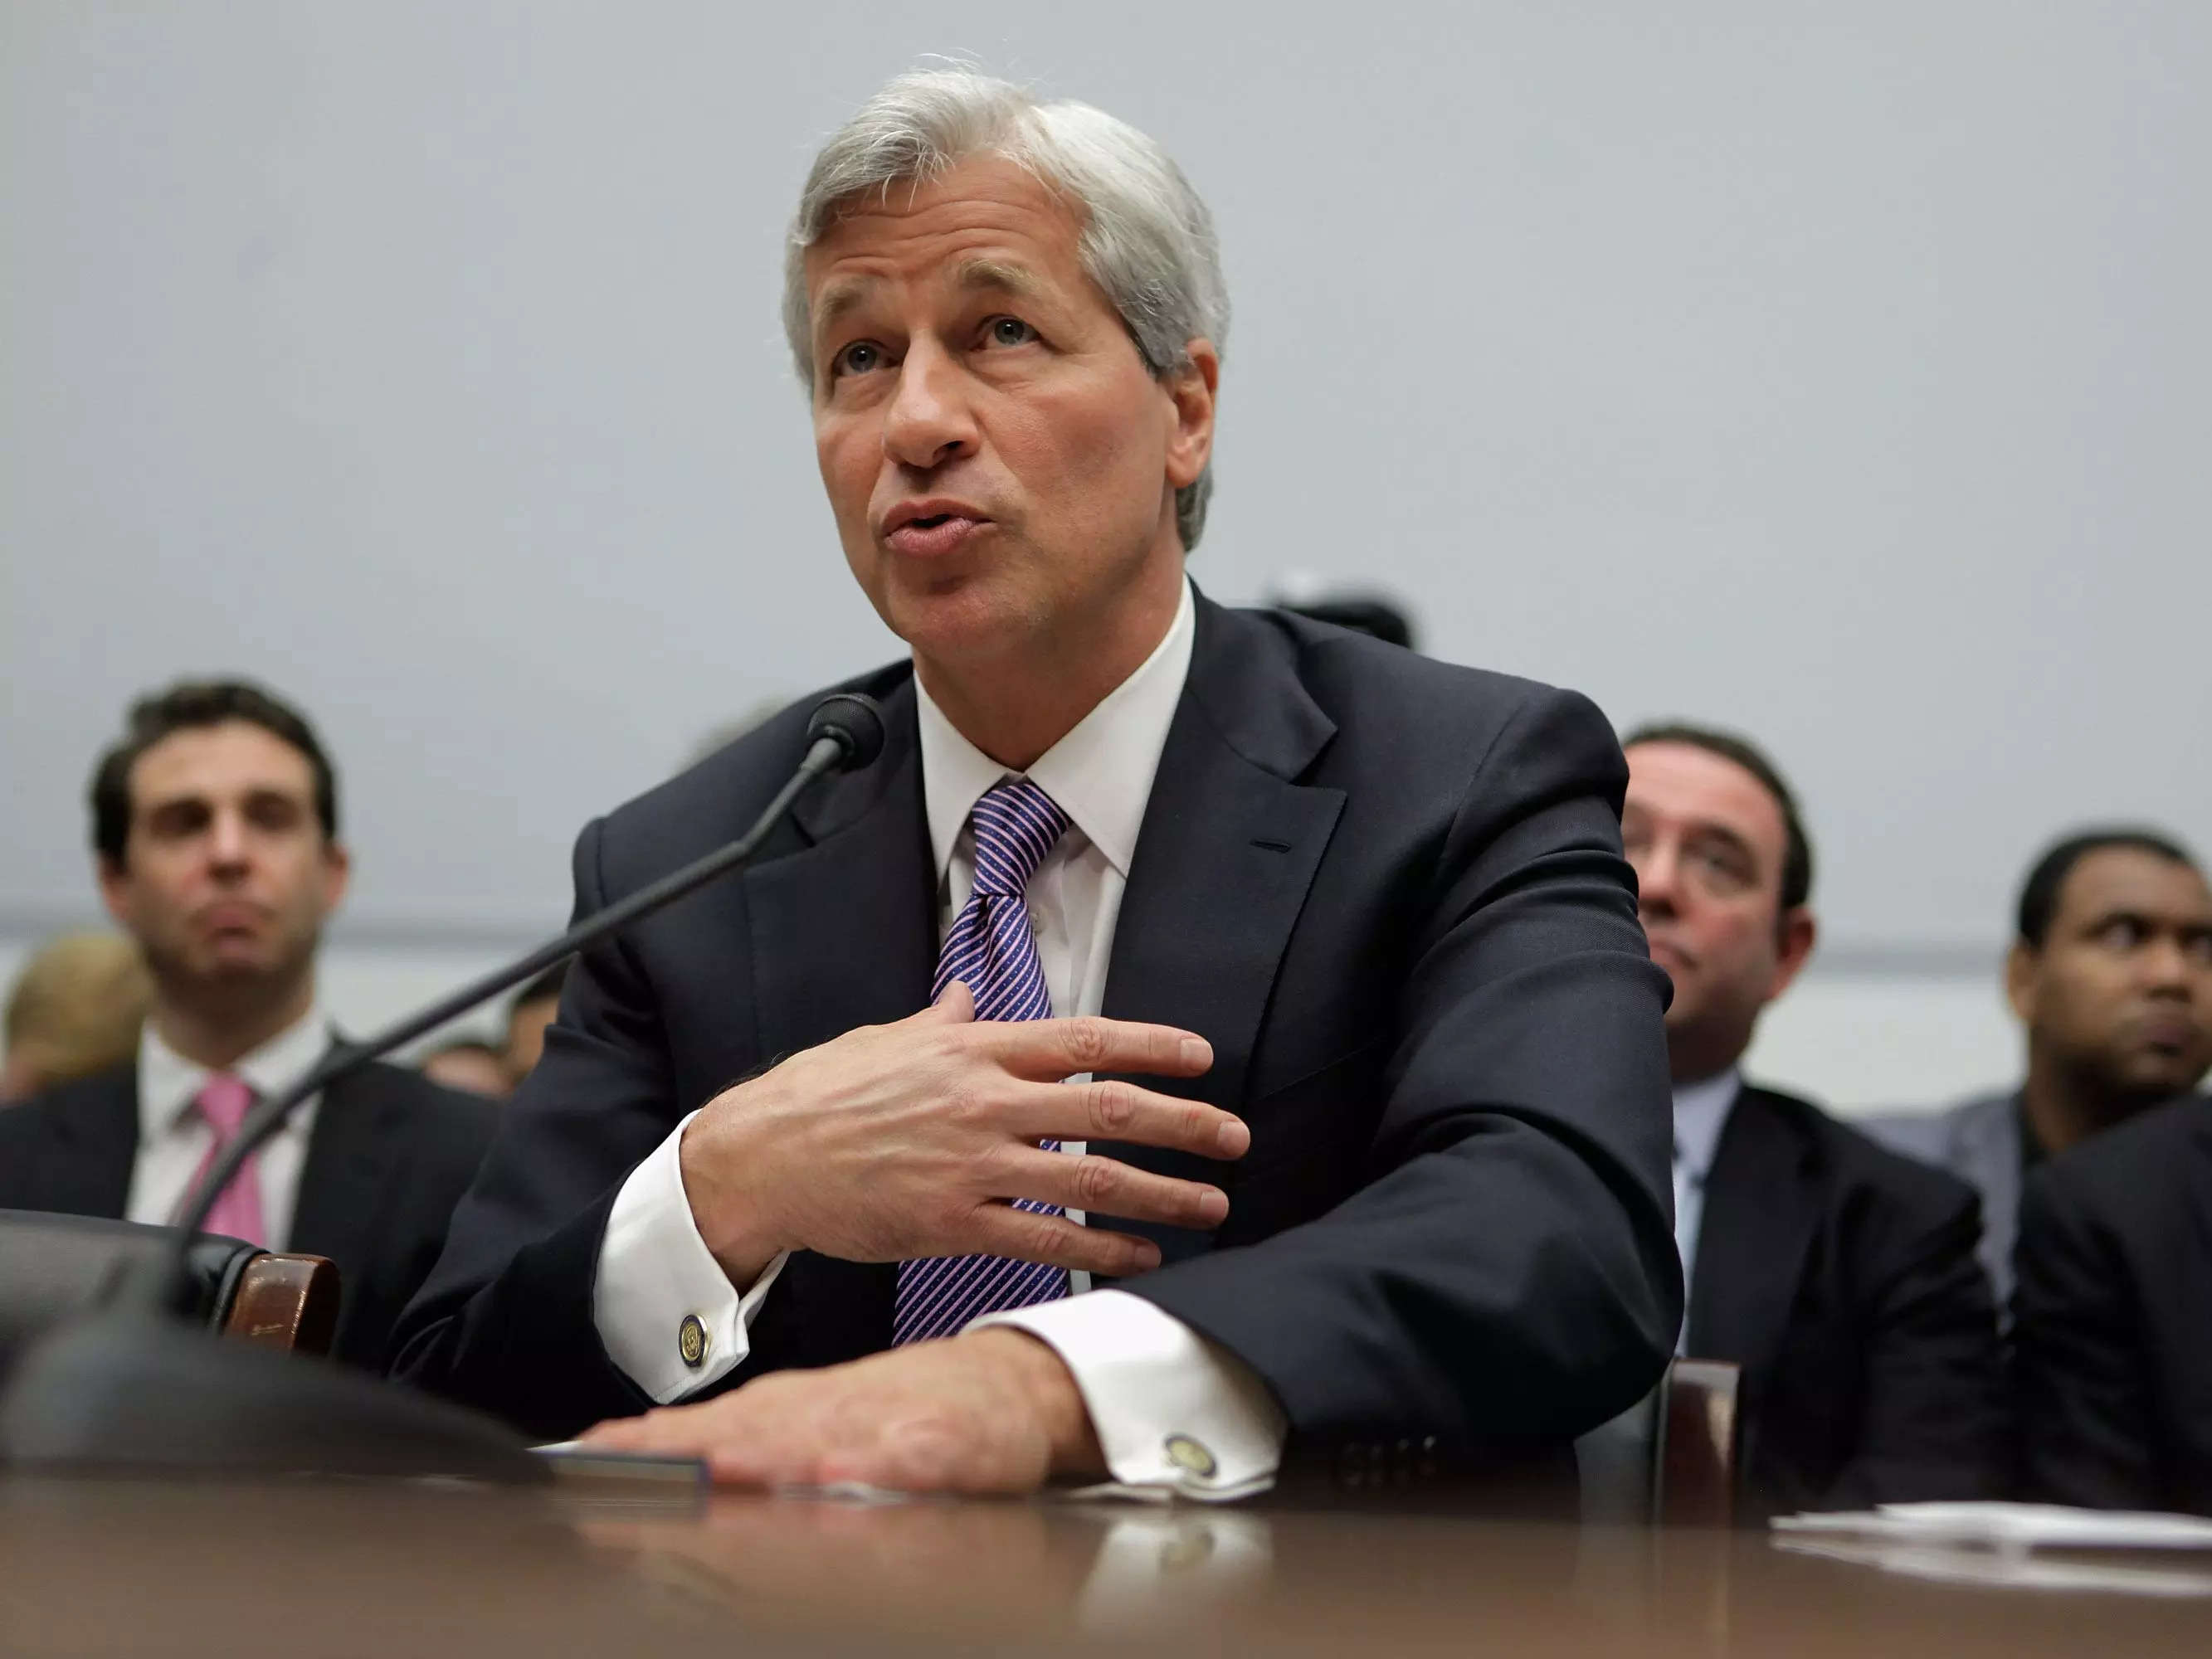 JP Morgan boss Jamie Dimon says the US, not Saudi Arabia, is the “producer” of oil, urging them to pump more oil days after OPEC announced output cuts.